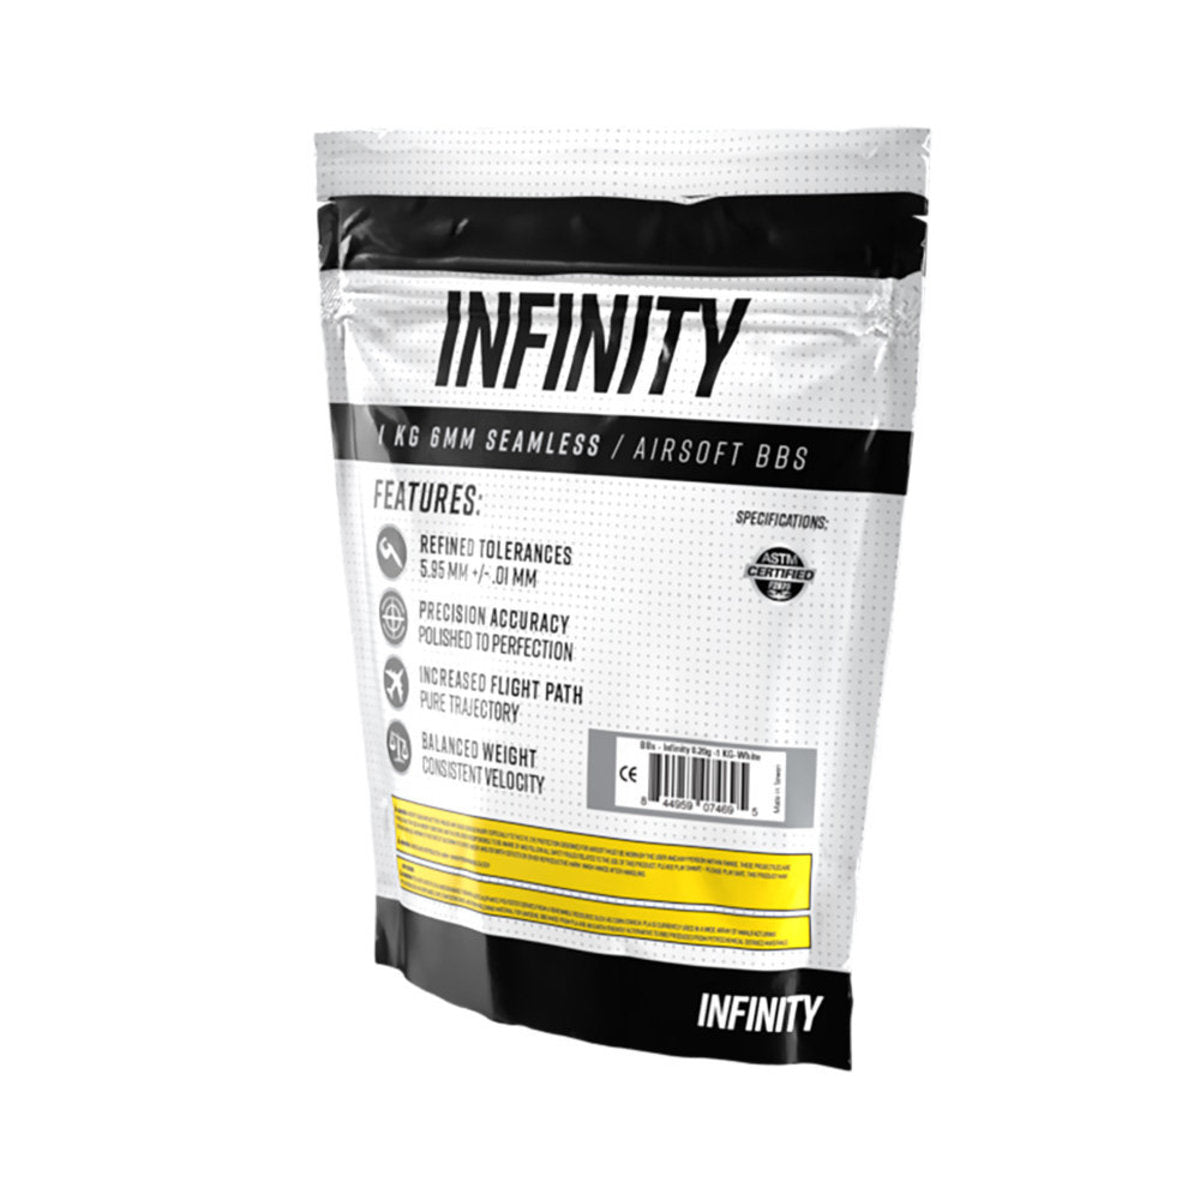 Infinity 0.20G 5,000Ct Airsoft Bbs (1Kg)